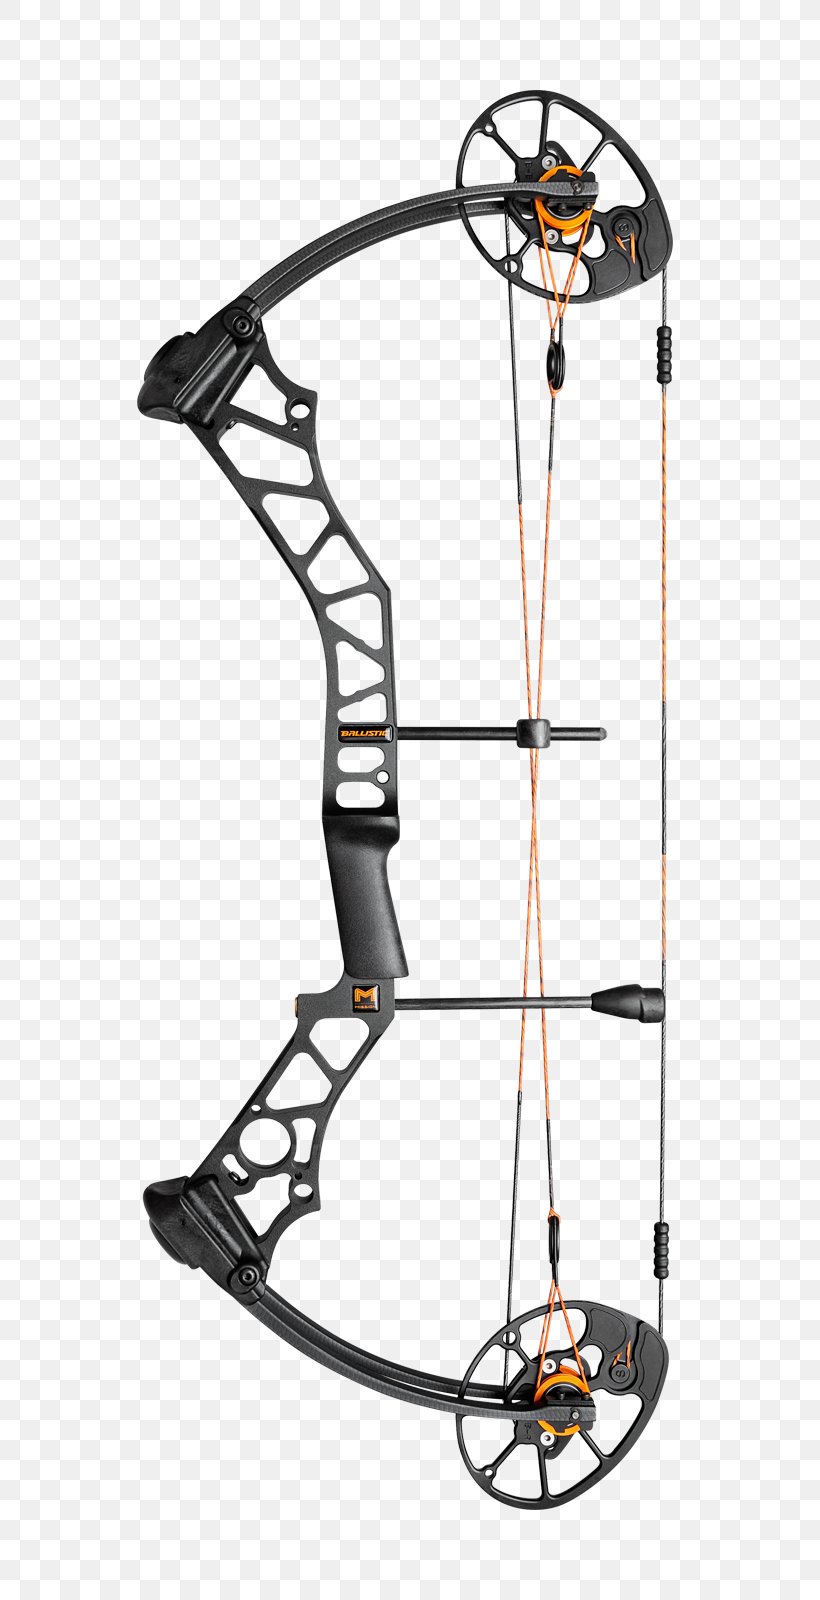 Compound Bows Hunting Ballistics Bow And Arrow Crossbow, PNG, 650x1600px, Compound Bows, Archery, Ballistics, Bicycle Accessory, Borkholder Archery Download Free